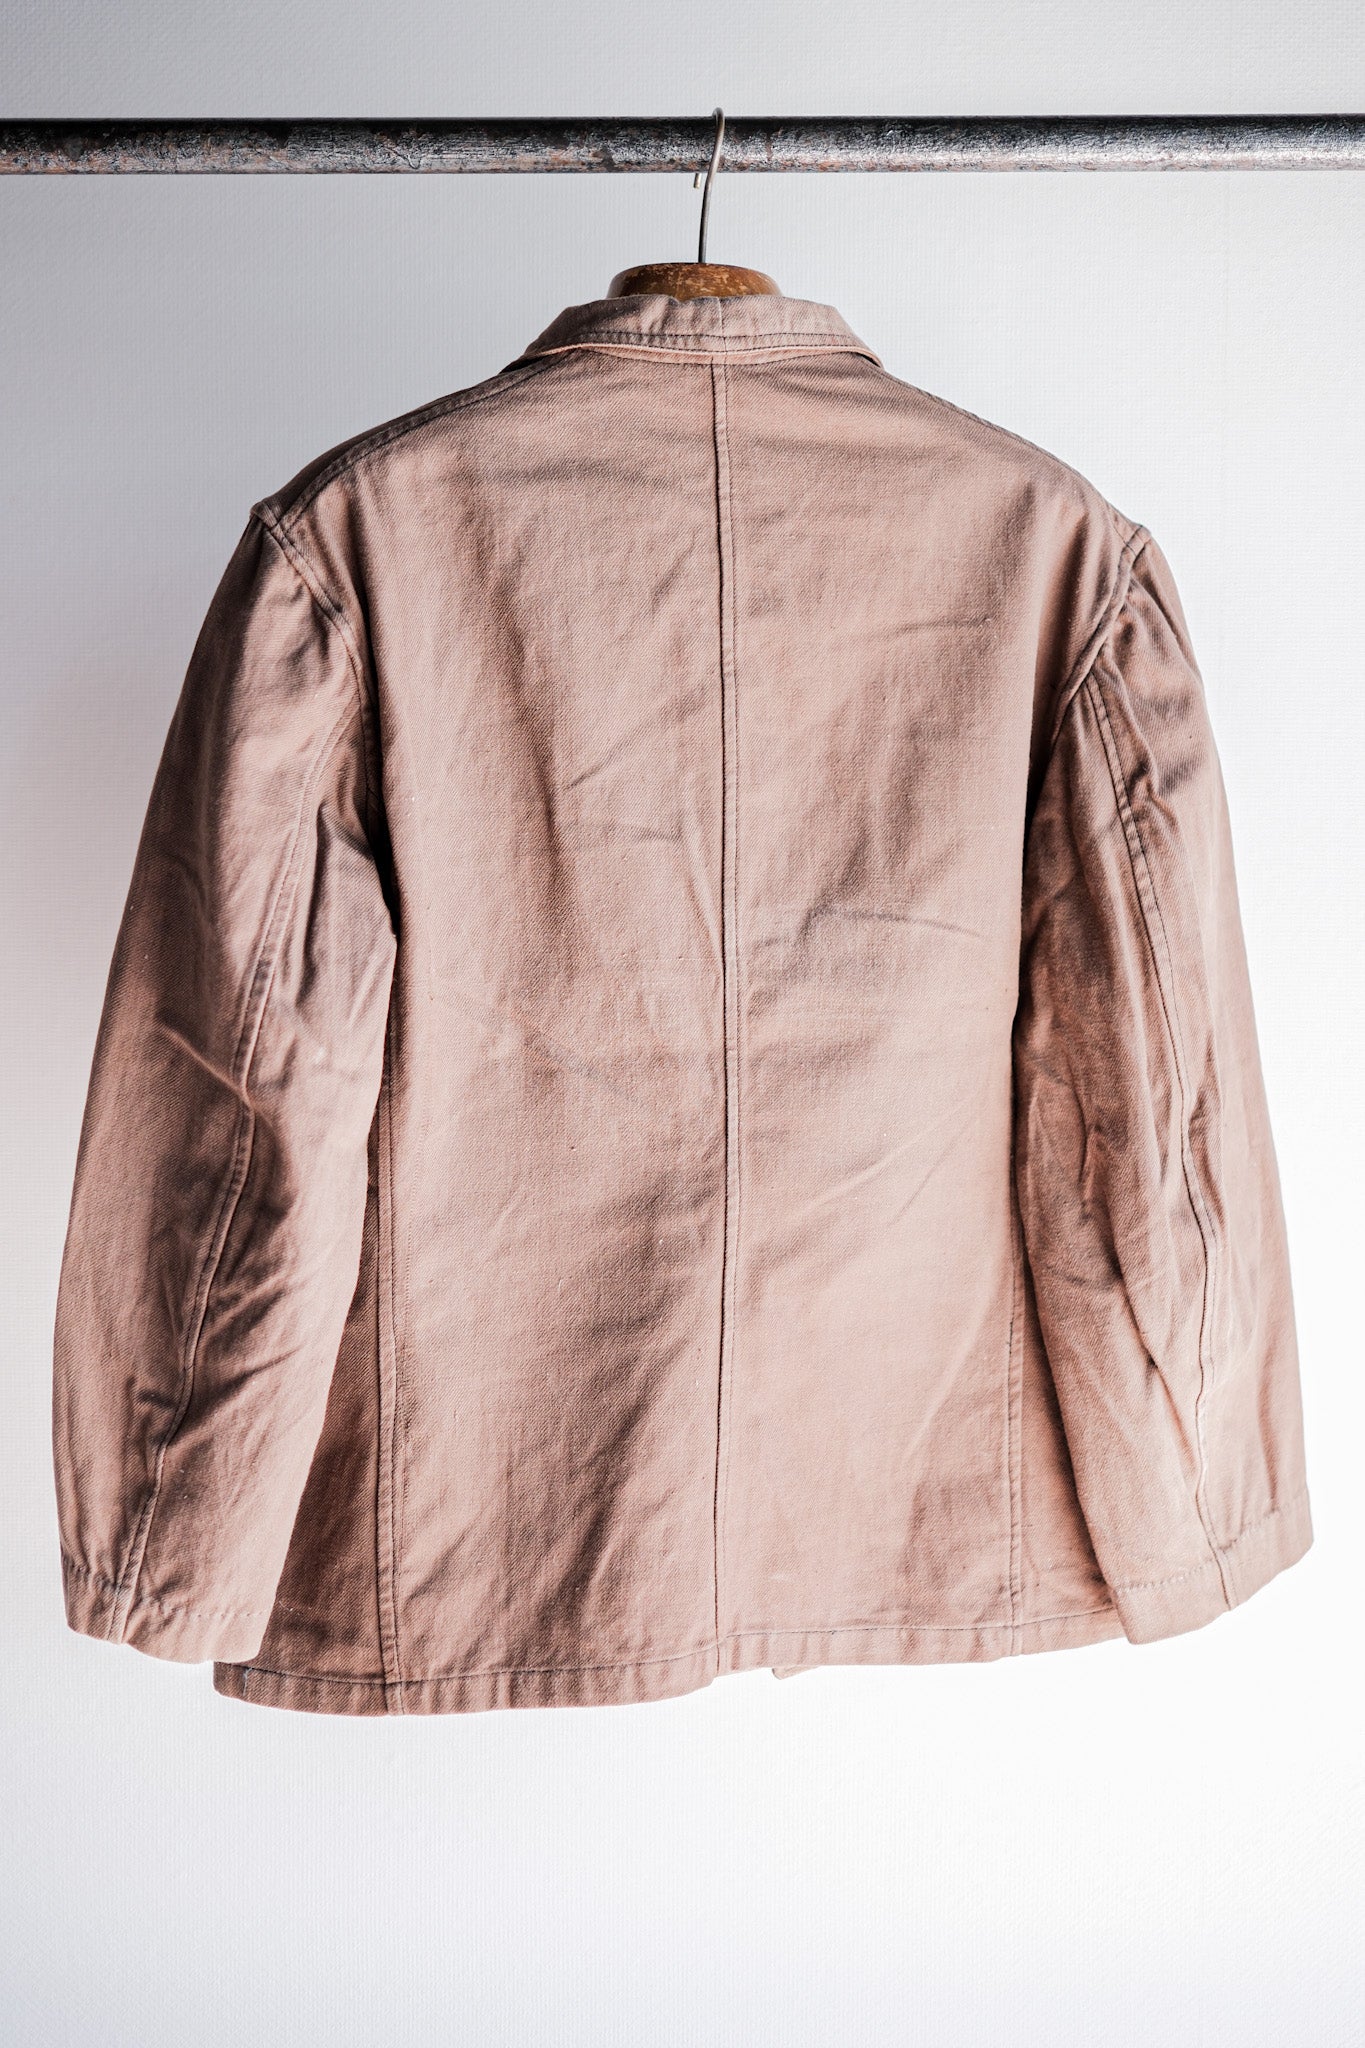 [~ 40's] French Vintage Brown Cotton Twill Work Jacket